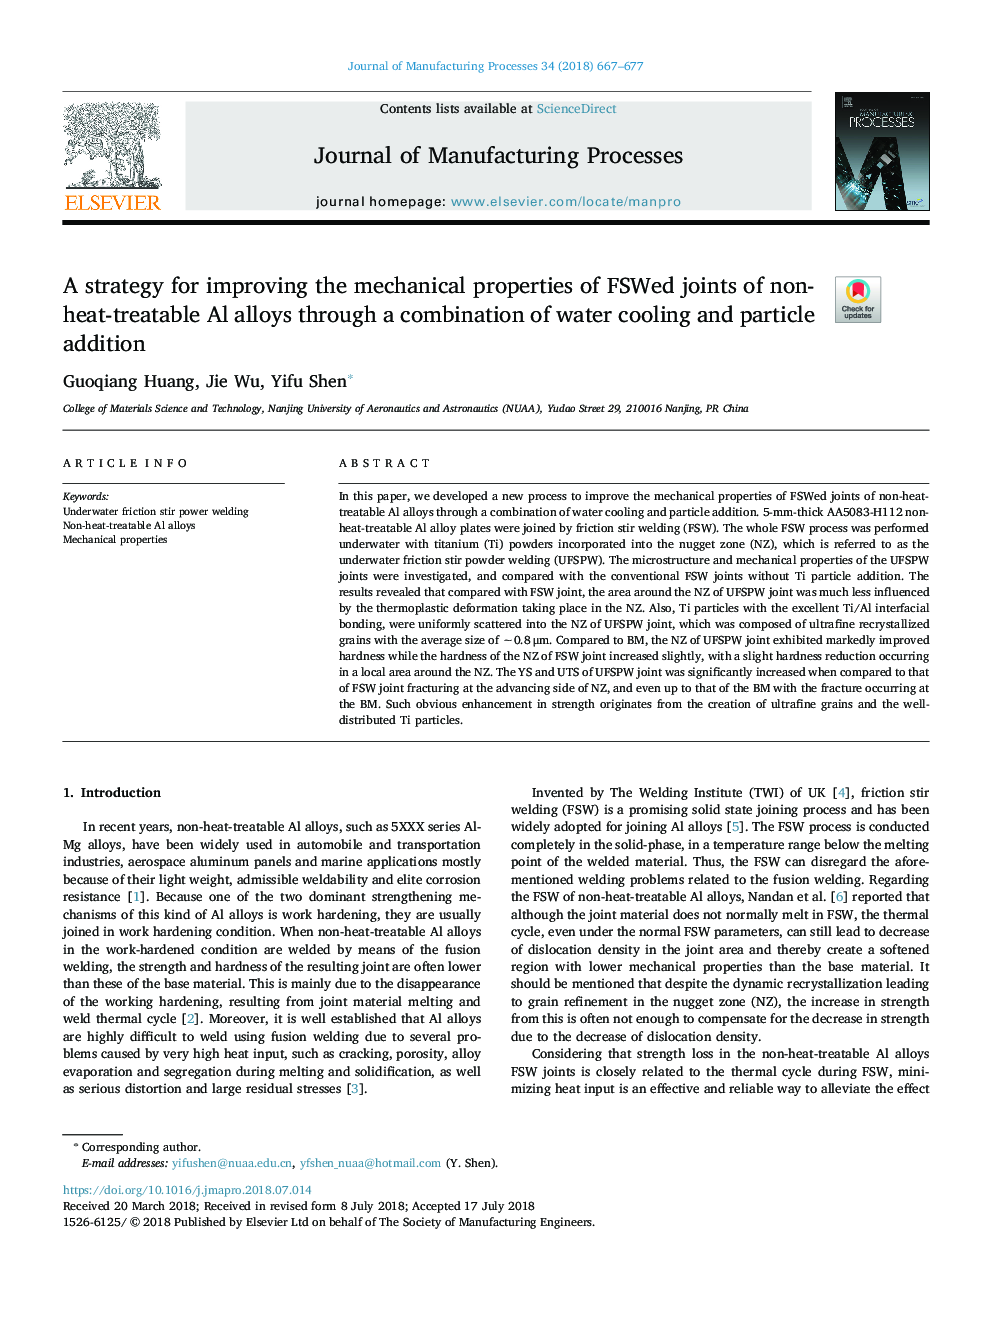 A strategy for improving the mechanical properties of FSWed joints of non-heat-treatable Al alloys through a combination of water cooling and particle addition